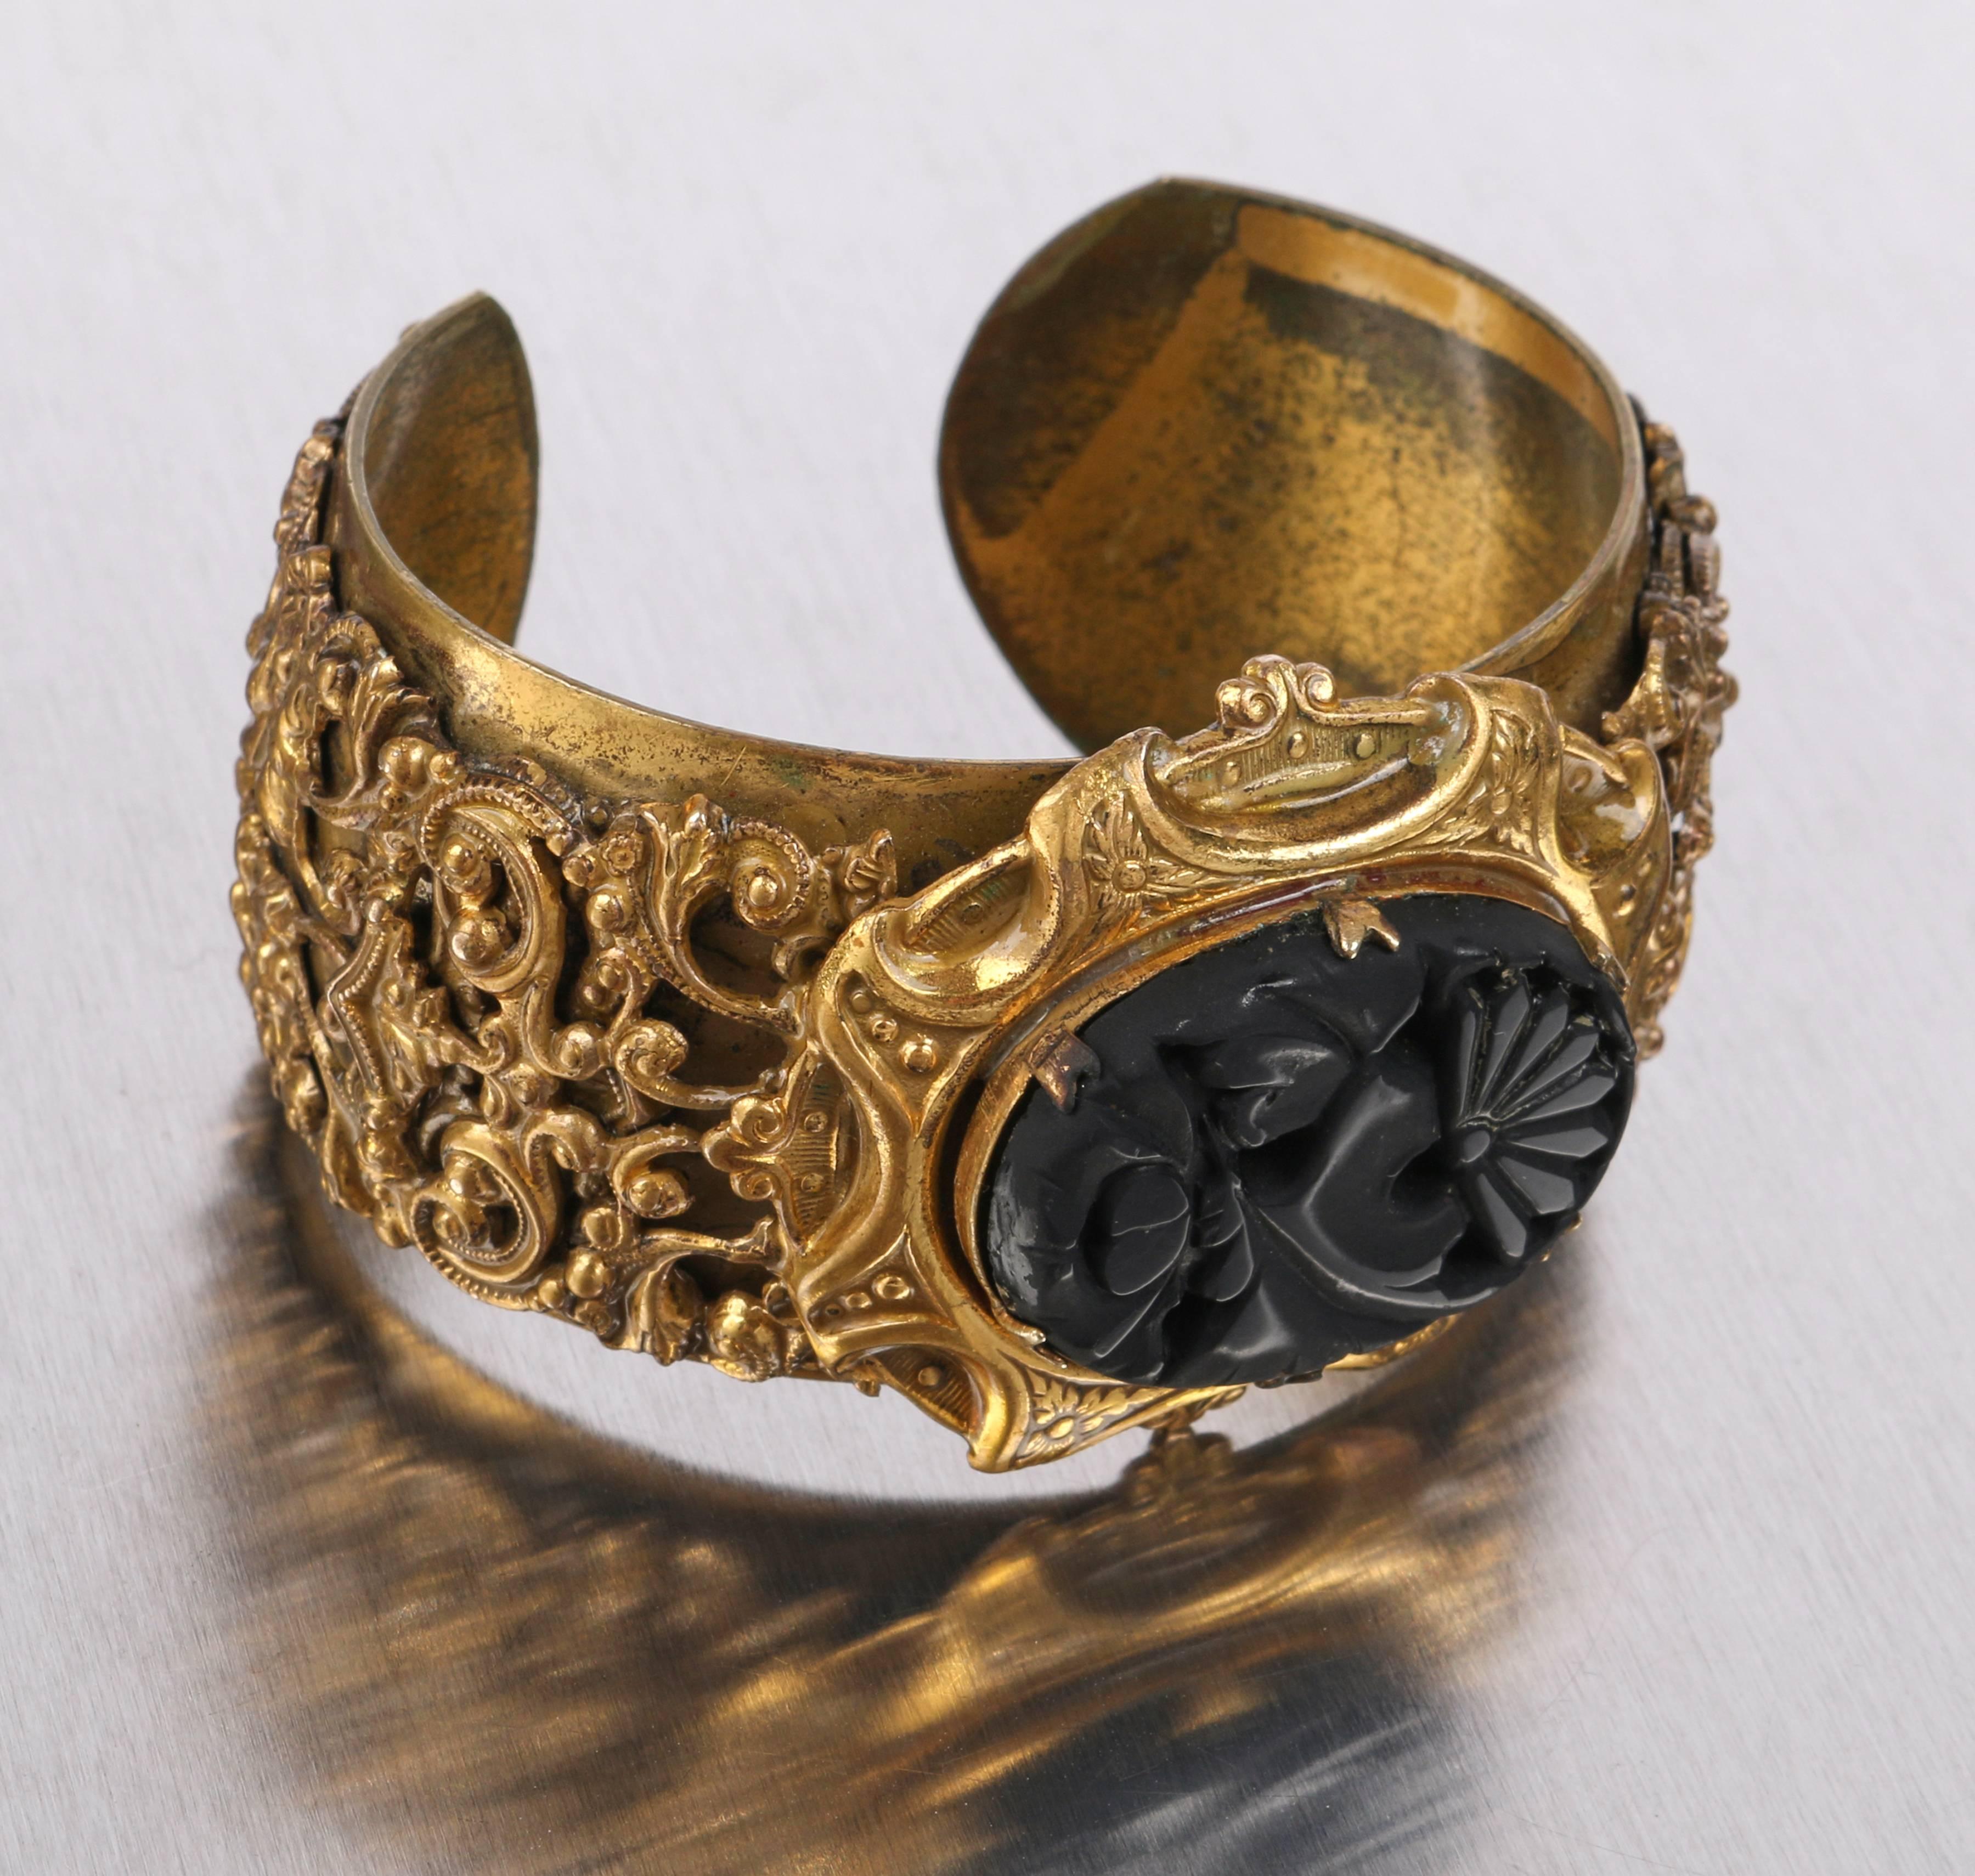 Vintage Victorian Revival c.1930's brass tone metal wide cuff bracelet. Elaborate floral and scroll filigree carved overlay. Large black oval glass stone with floral carved motif set in six prongs. Horizontally oriented stone is set in raised brass